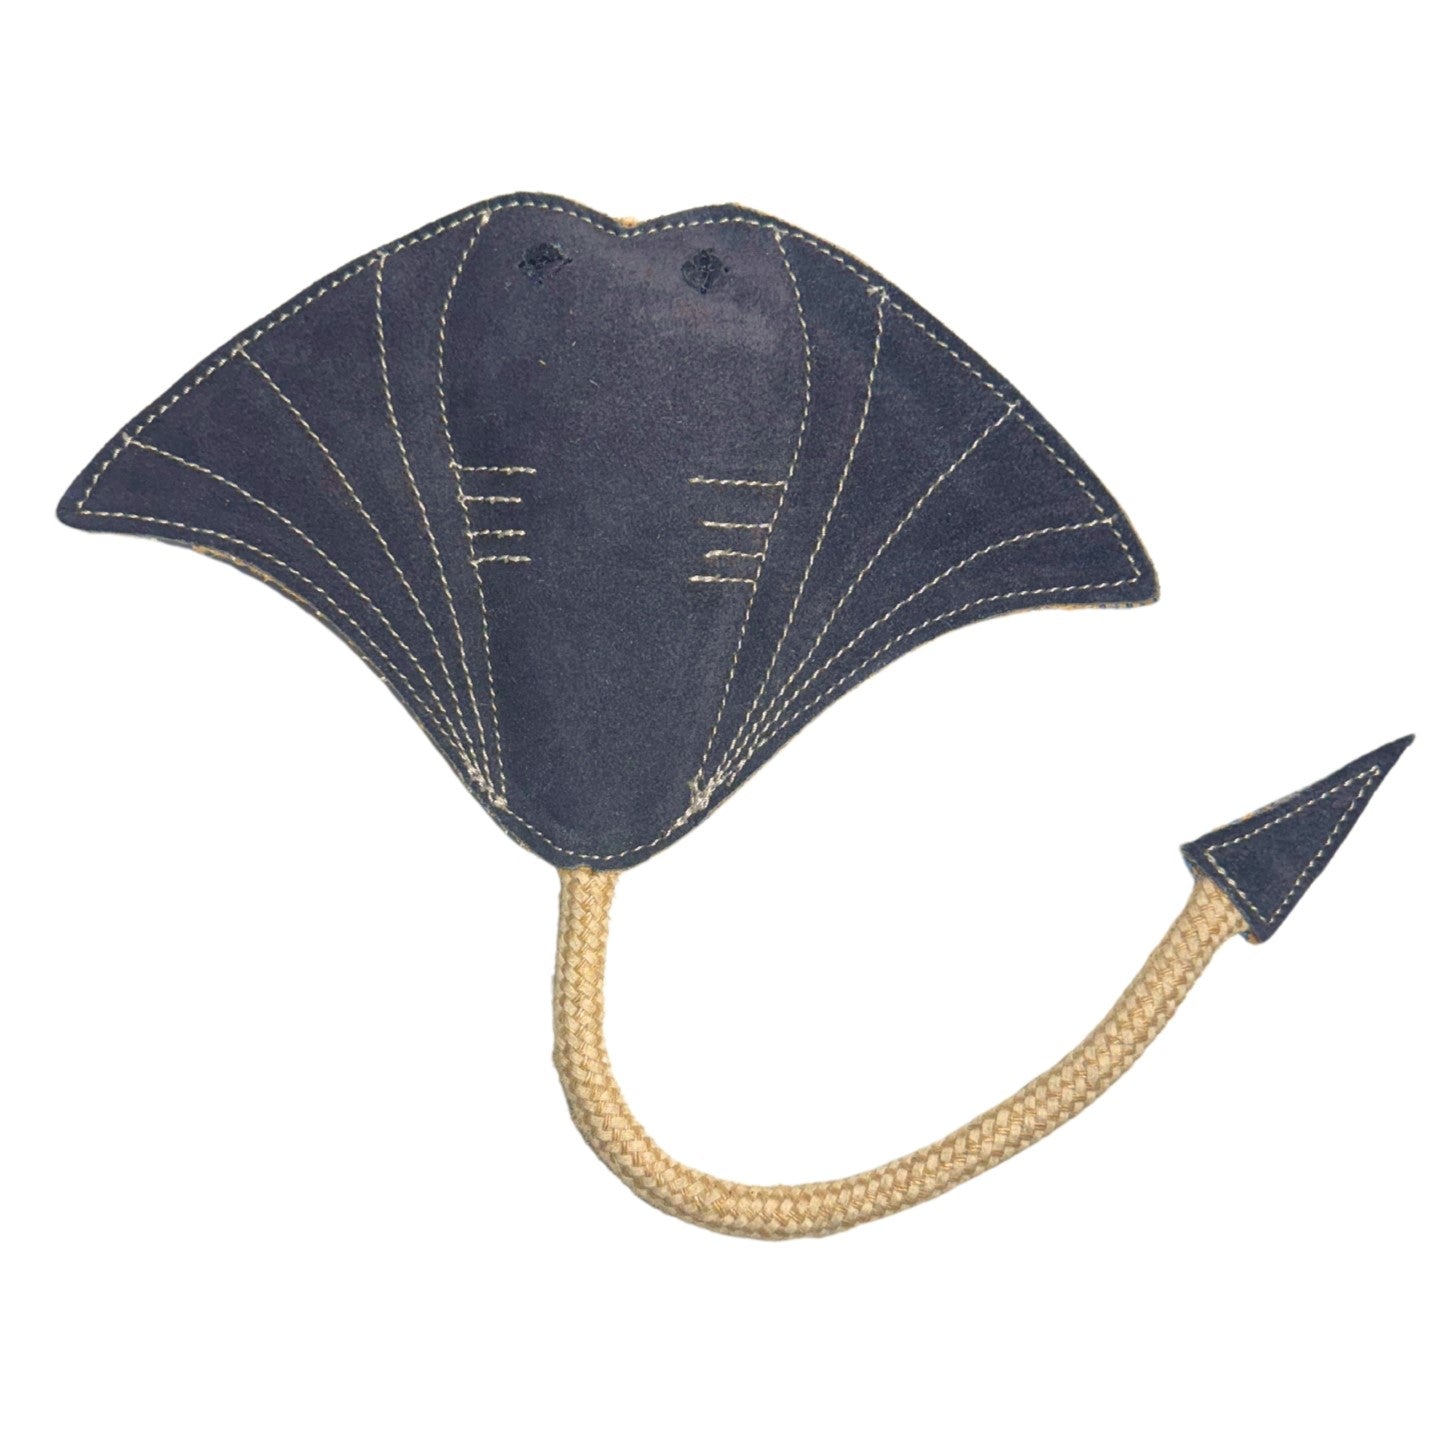 A Simon the Stingray - navy kite by Georgie Paws with intricate blue and white design details, featuring a long, coconut fiber rope as its tail against a white background.